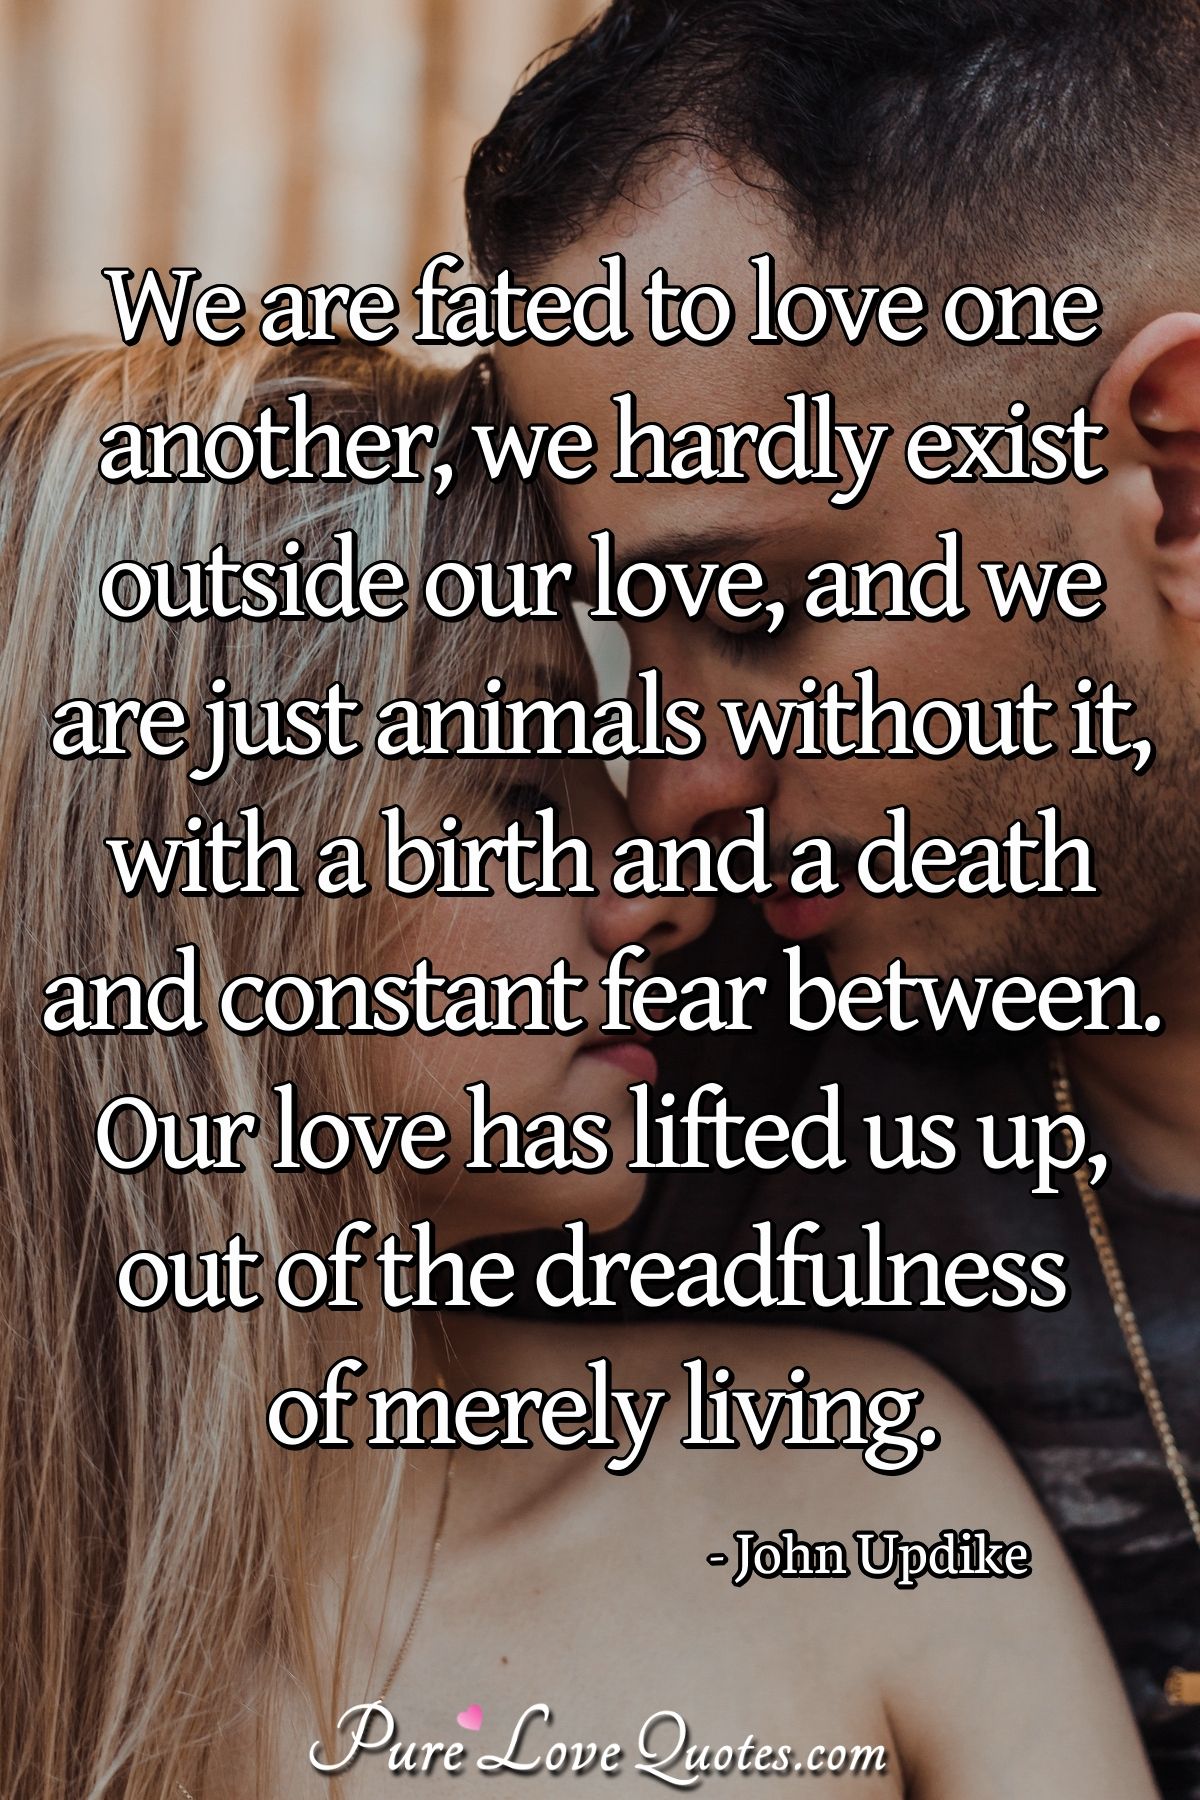 We are fated to love one another, we hardly exist outside our love, and we are just animals without it, with a birth and a death and constant fear between. Our love has lifted us up, out of the dreadfulness of merely living. - John Updike